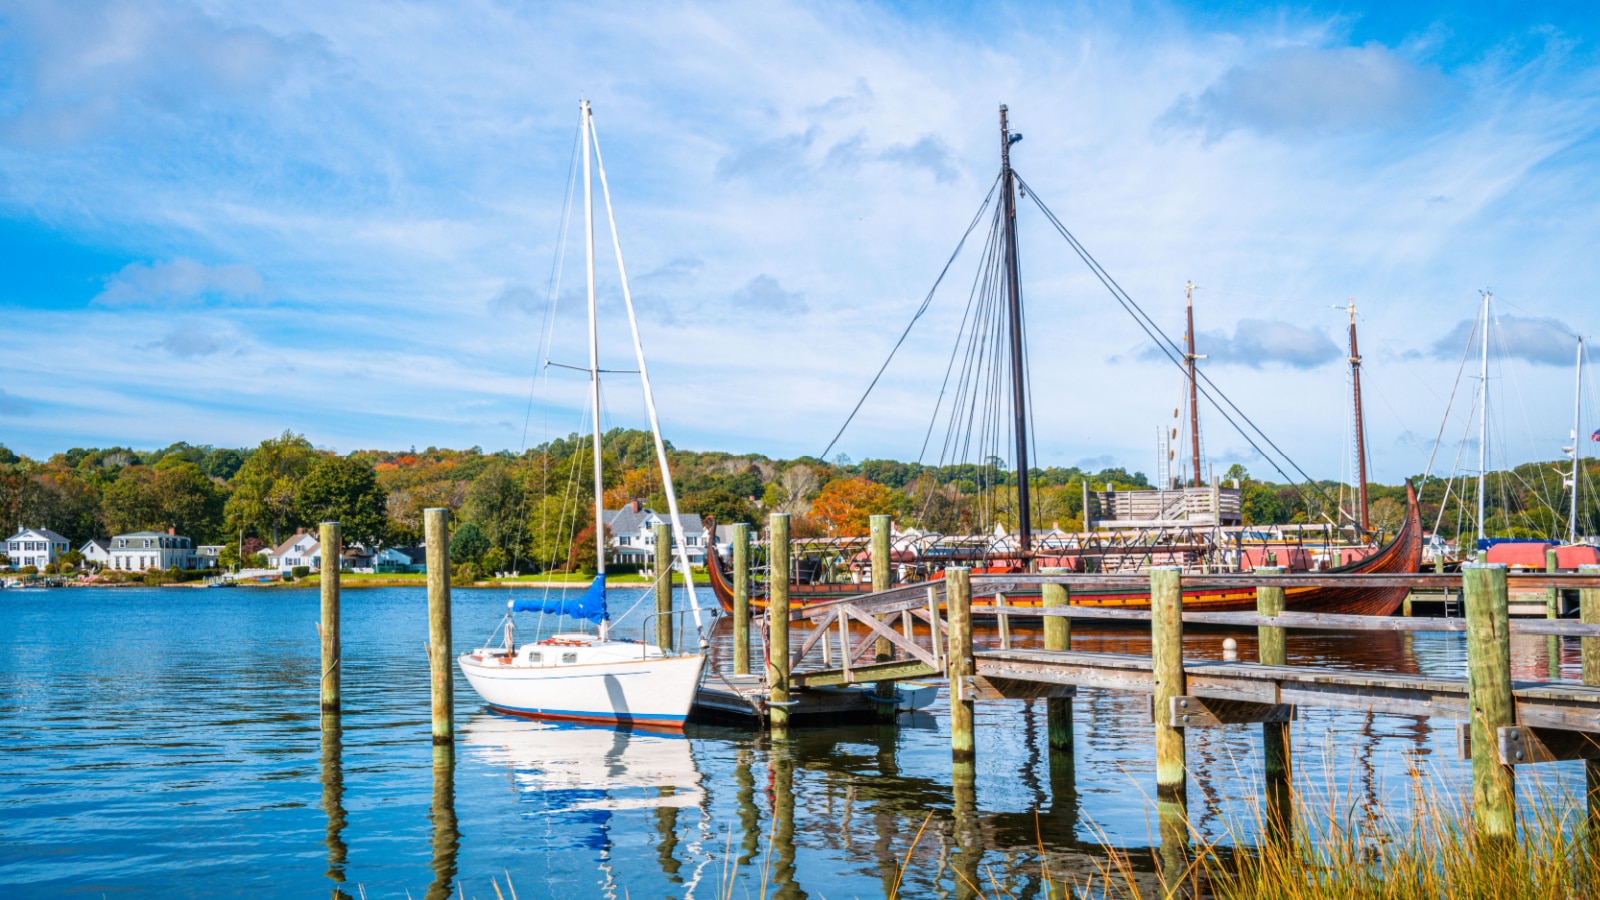 Commercial dock with moored white boat and sailing ship in Mystic, Connecticut